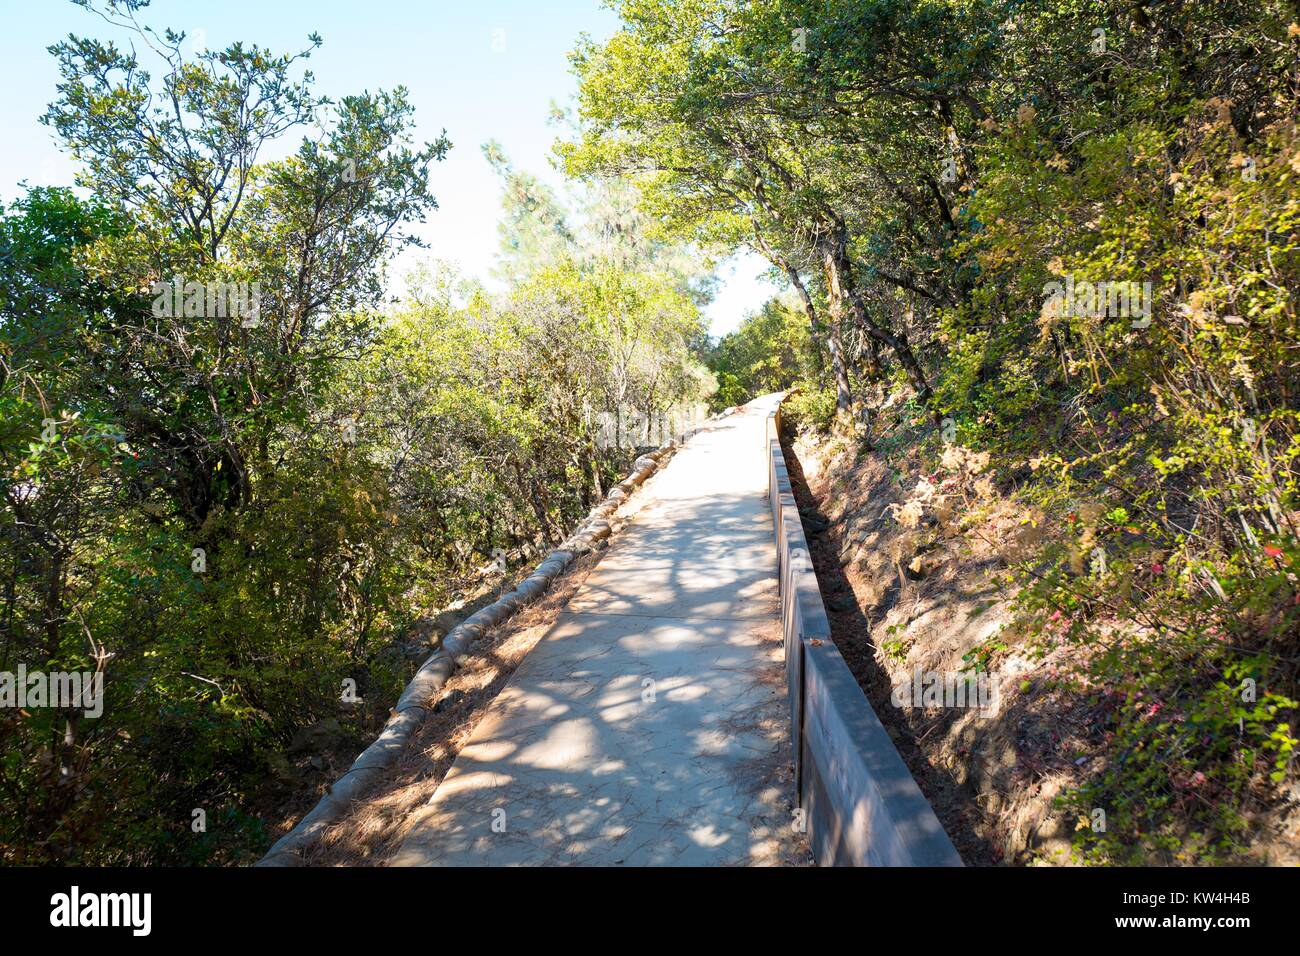 Paved, handicap accessible portion of the Mary Bowerman Trail at the summit of Mount Diablo, August 13, 2016. Mount Diablo is the highest peak in the San Francisco Bay Area, and has one of the largest viewsheds of any mountain in the Western United States. Stock Photo